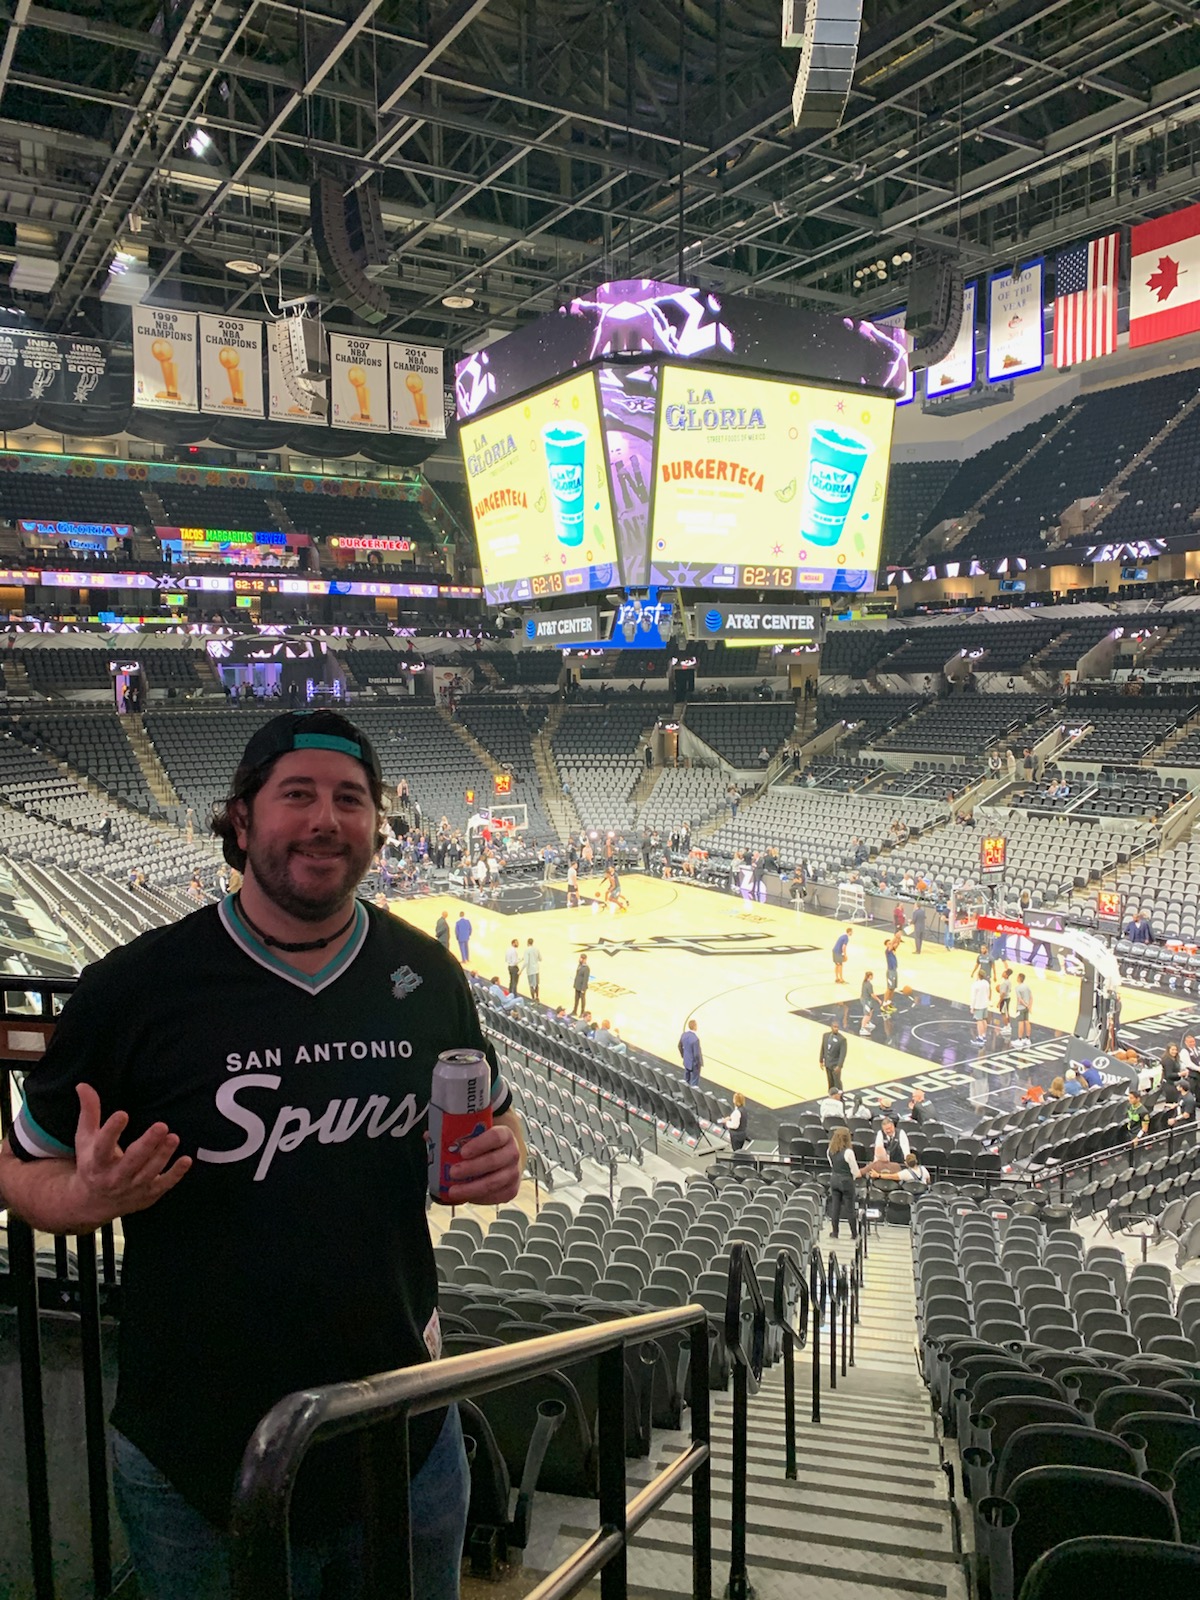 Lee shrugs in Spurs' arena (Go Spurs Go!) (Pre-Covid)